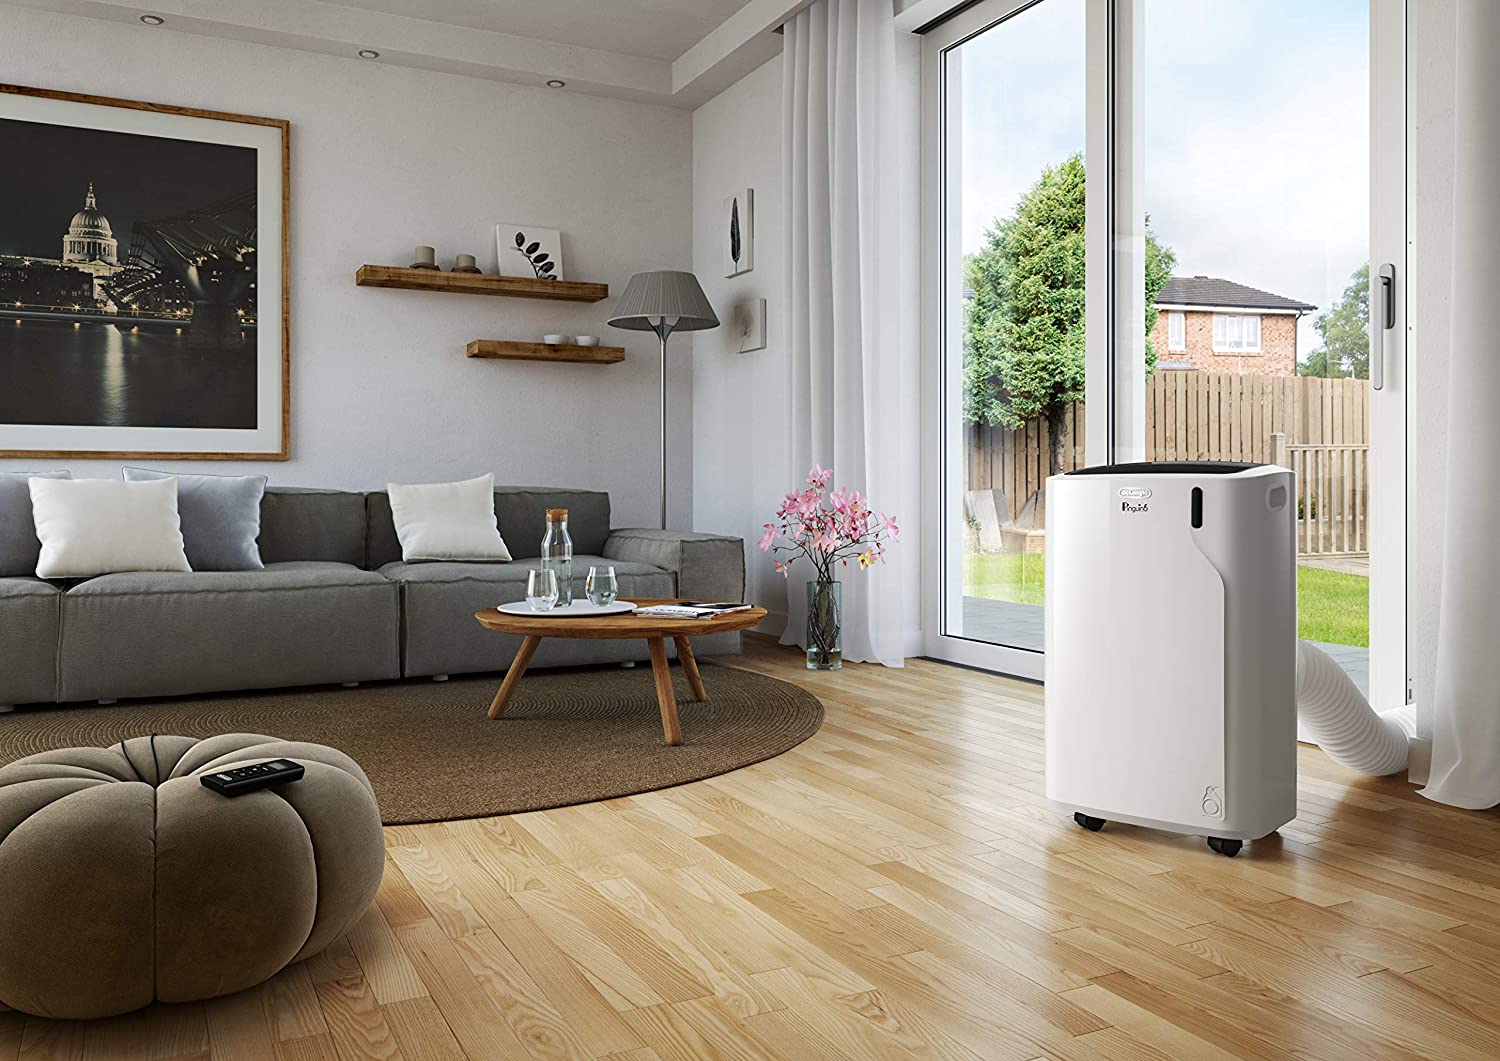 De'Longhi PACEM93 ECO Silent 10500 BTU Portable Air Conditioner - Great for Rooms up to 28 sqm